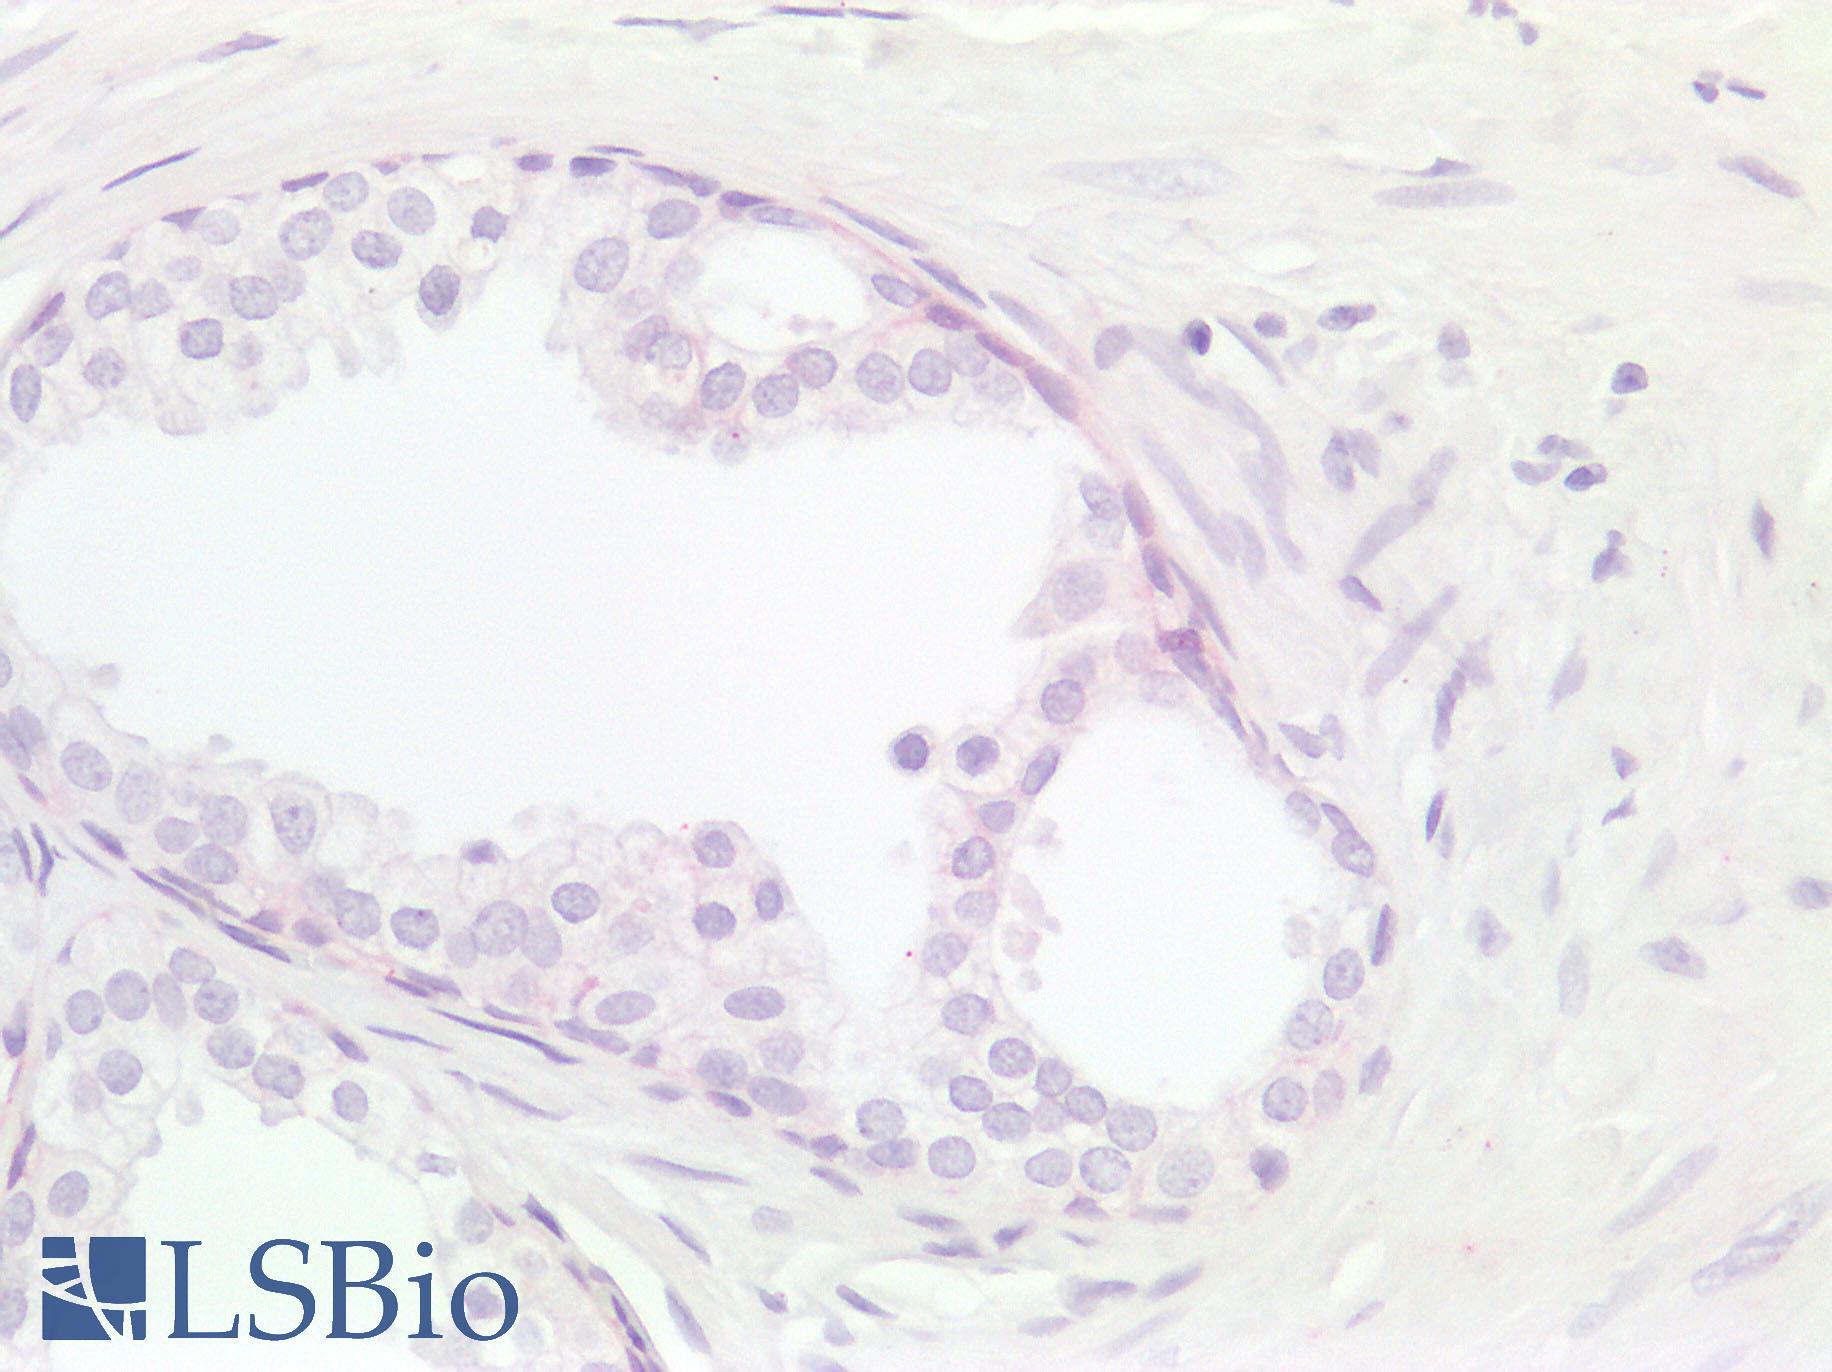 IL17A Antibody - Negative Staining in Human Prostate: Formalin-Fixed, Paraffin-Embedded (FFPE)